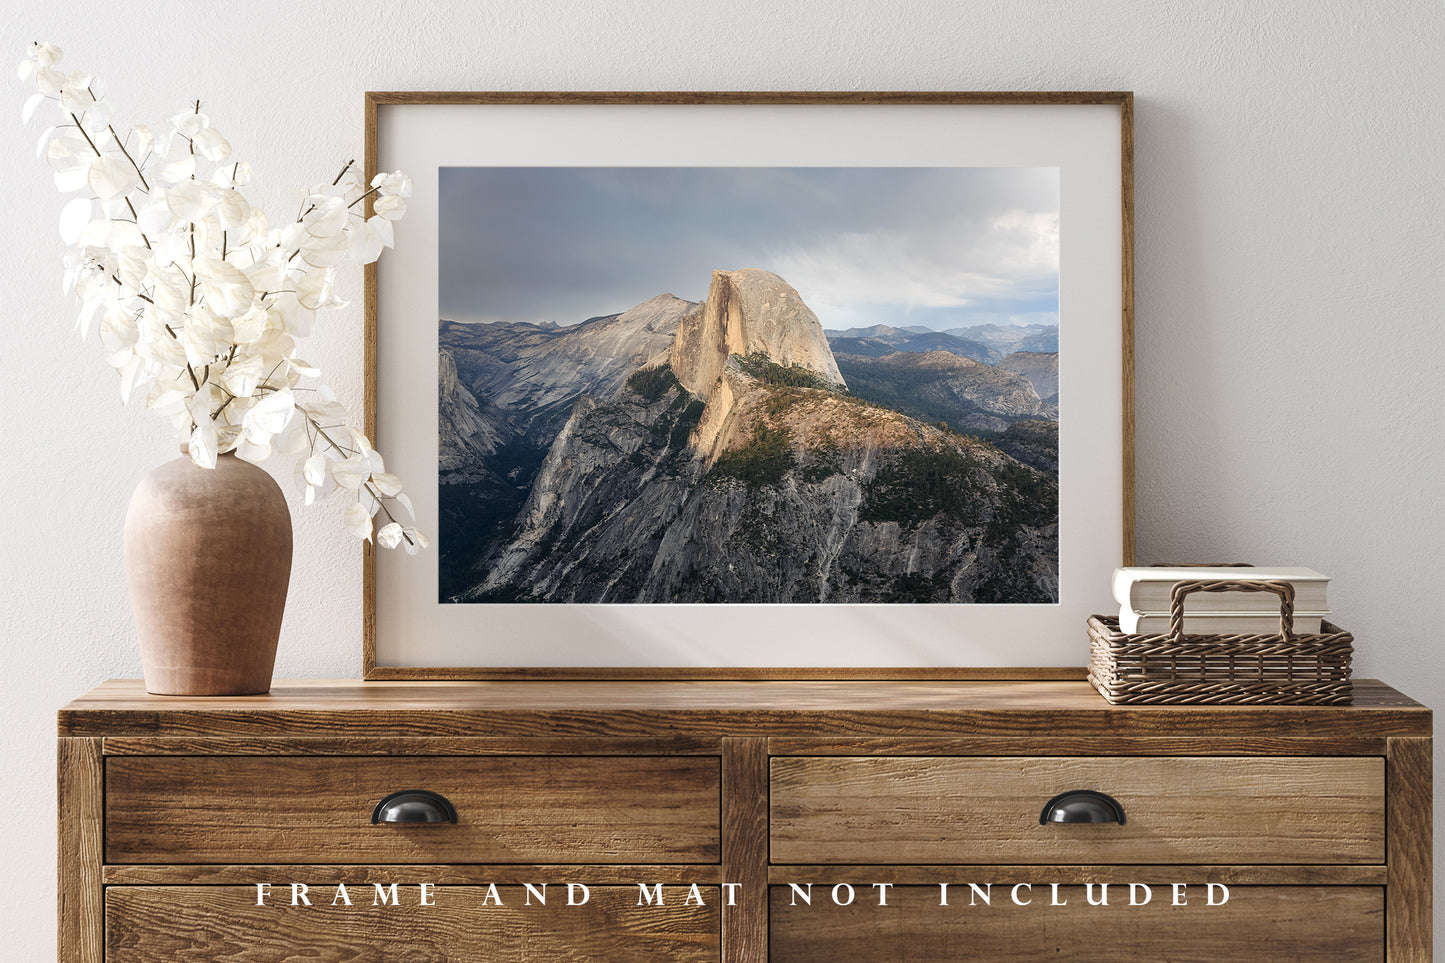 Sierra Nevada Photography Print (Not Framed) Picture of Half Dome Illuminated by Sunlight Under Moody Sky in California Yosemite National Park Wall Art Nature Decor